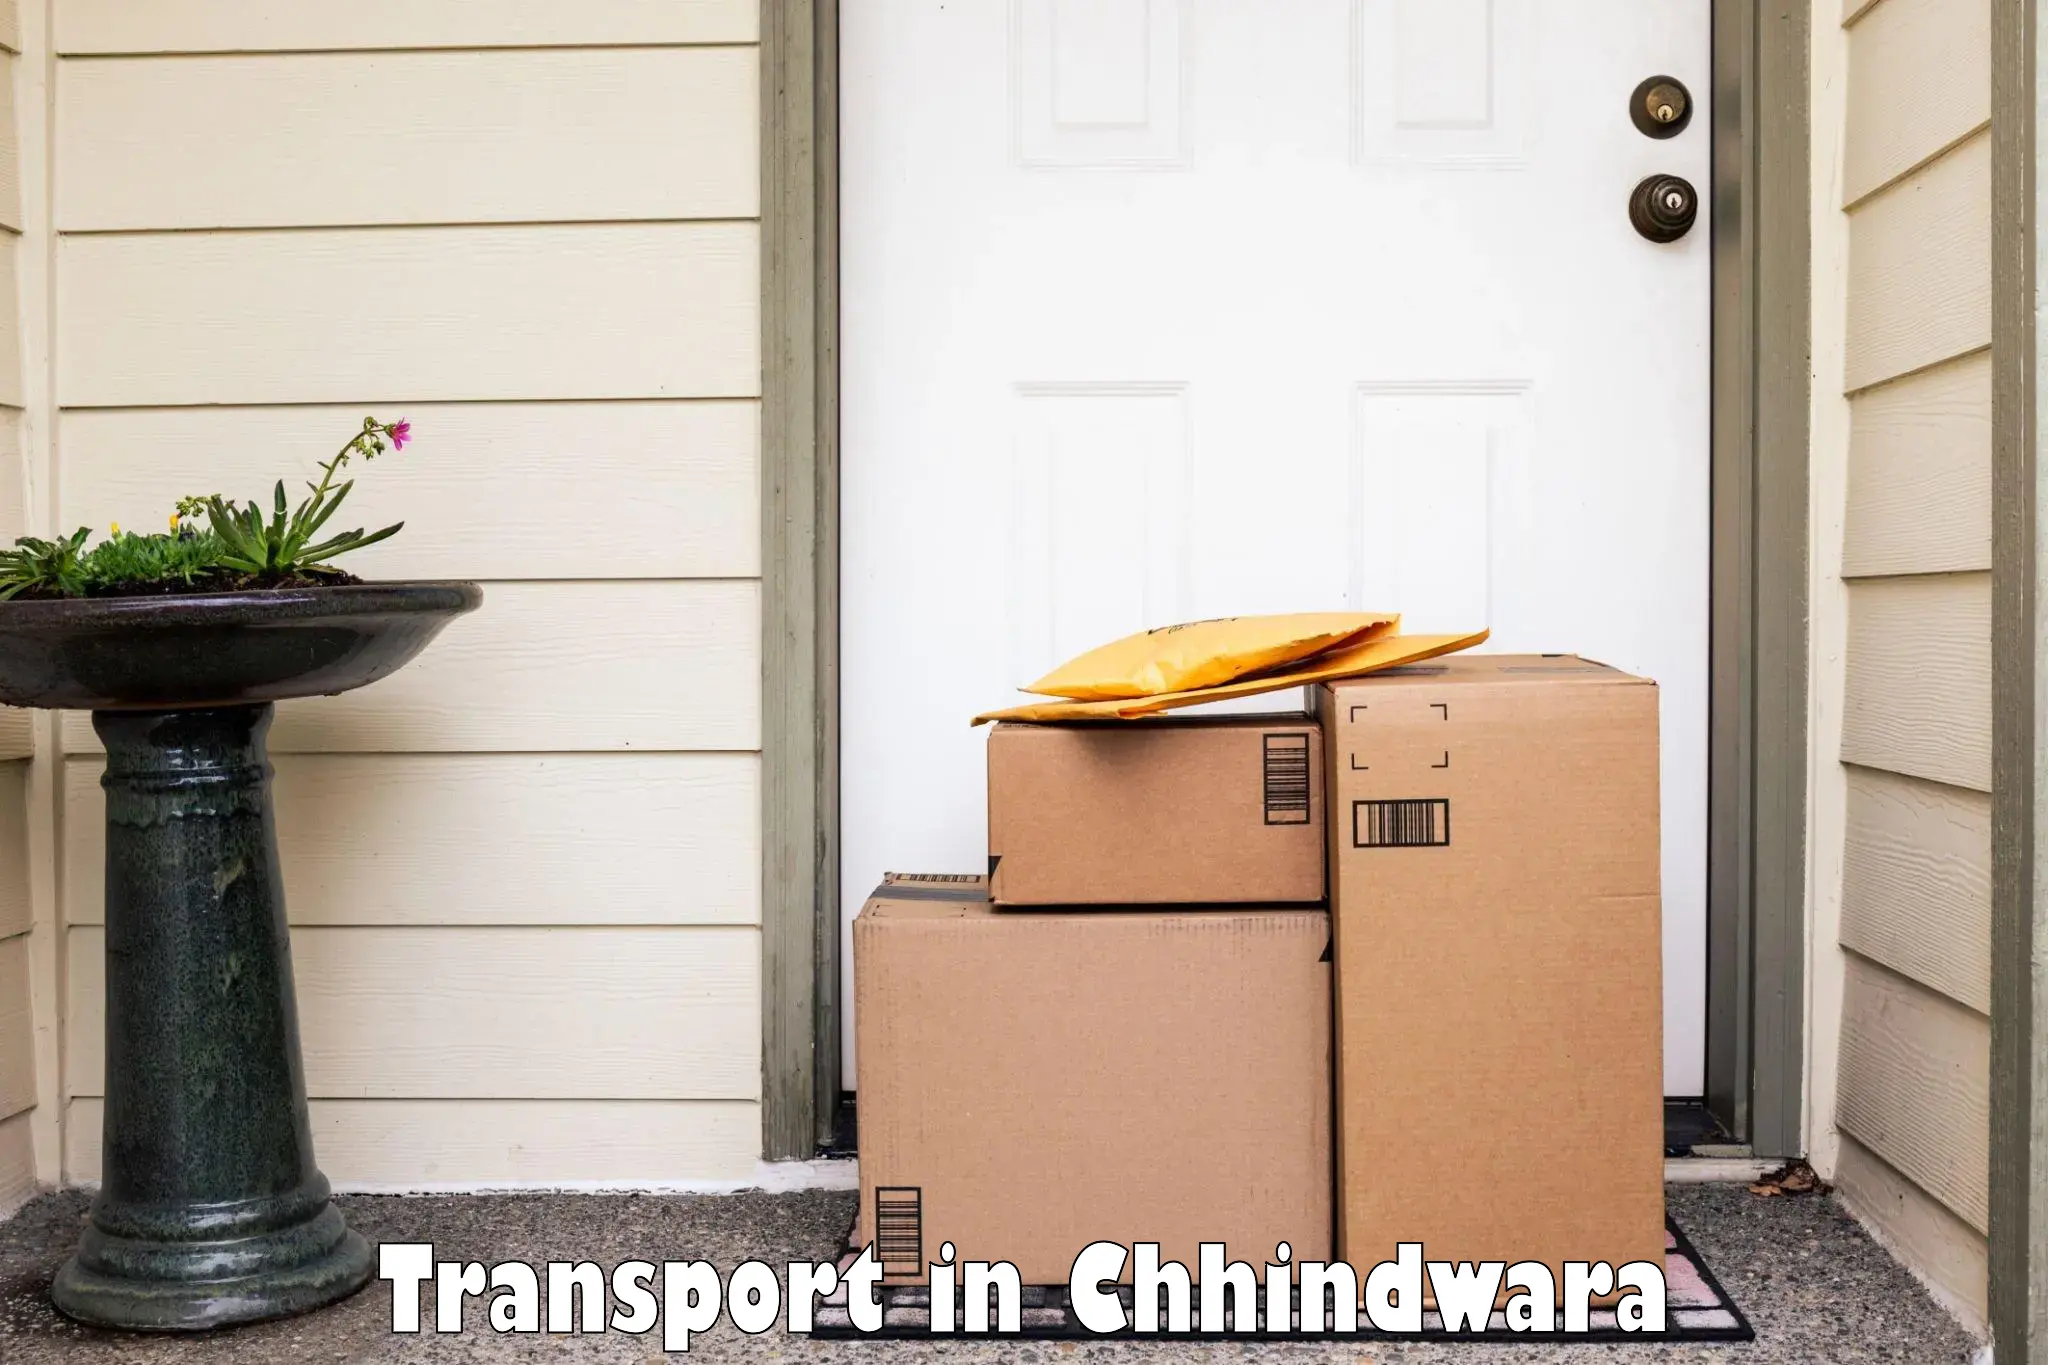 Daily parcel service transport in Chhindwara